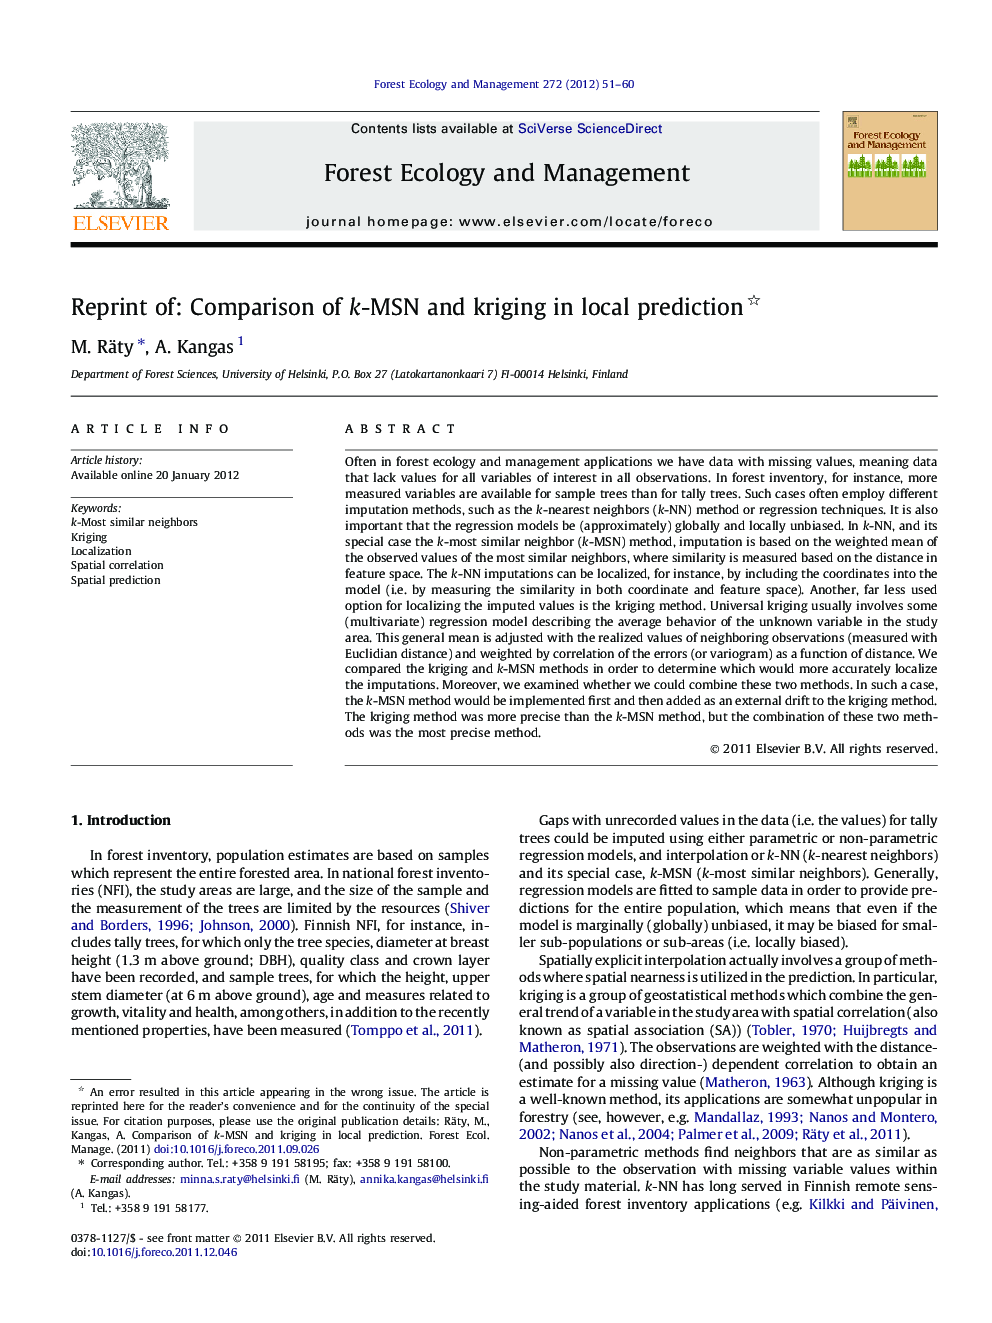 Reprint of: Comparison of k-MSN and kriging in local prediction 